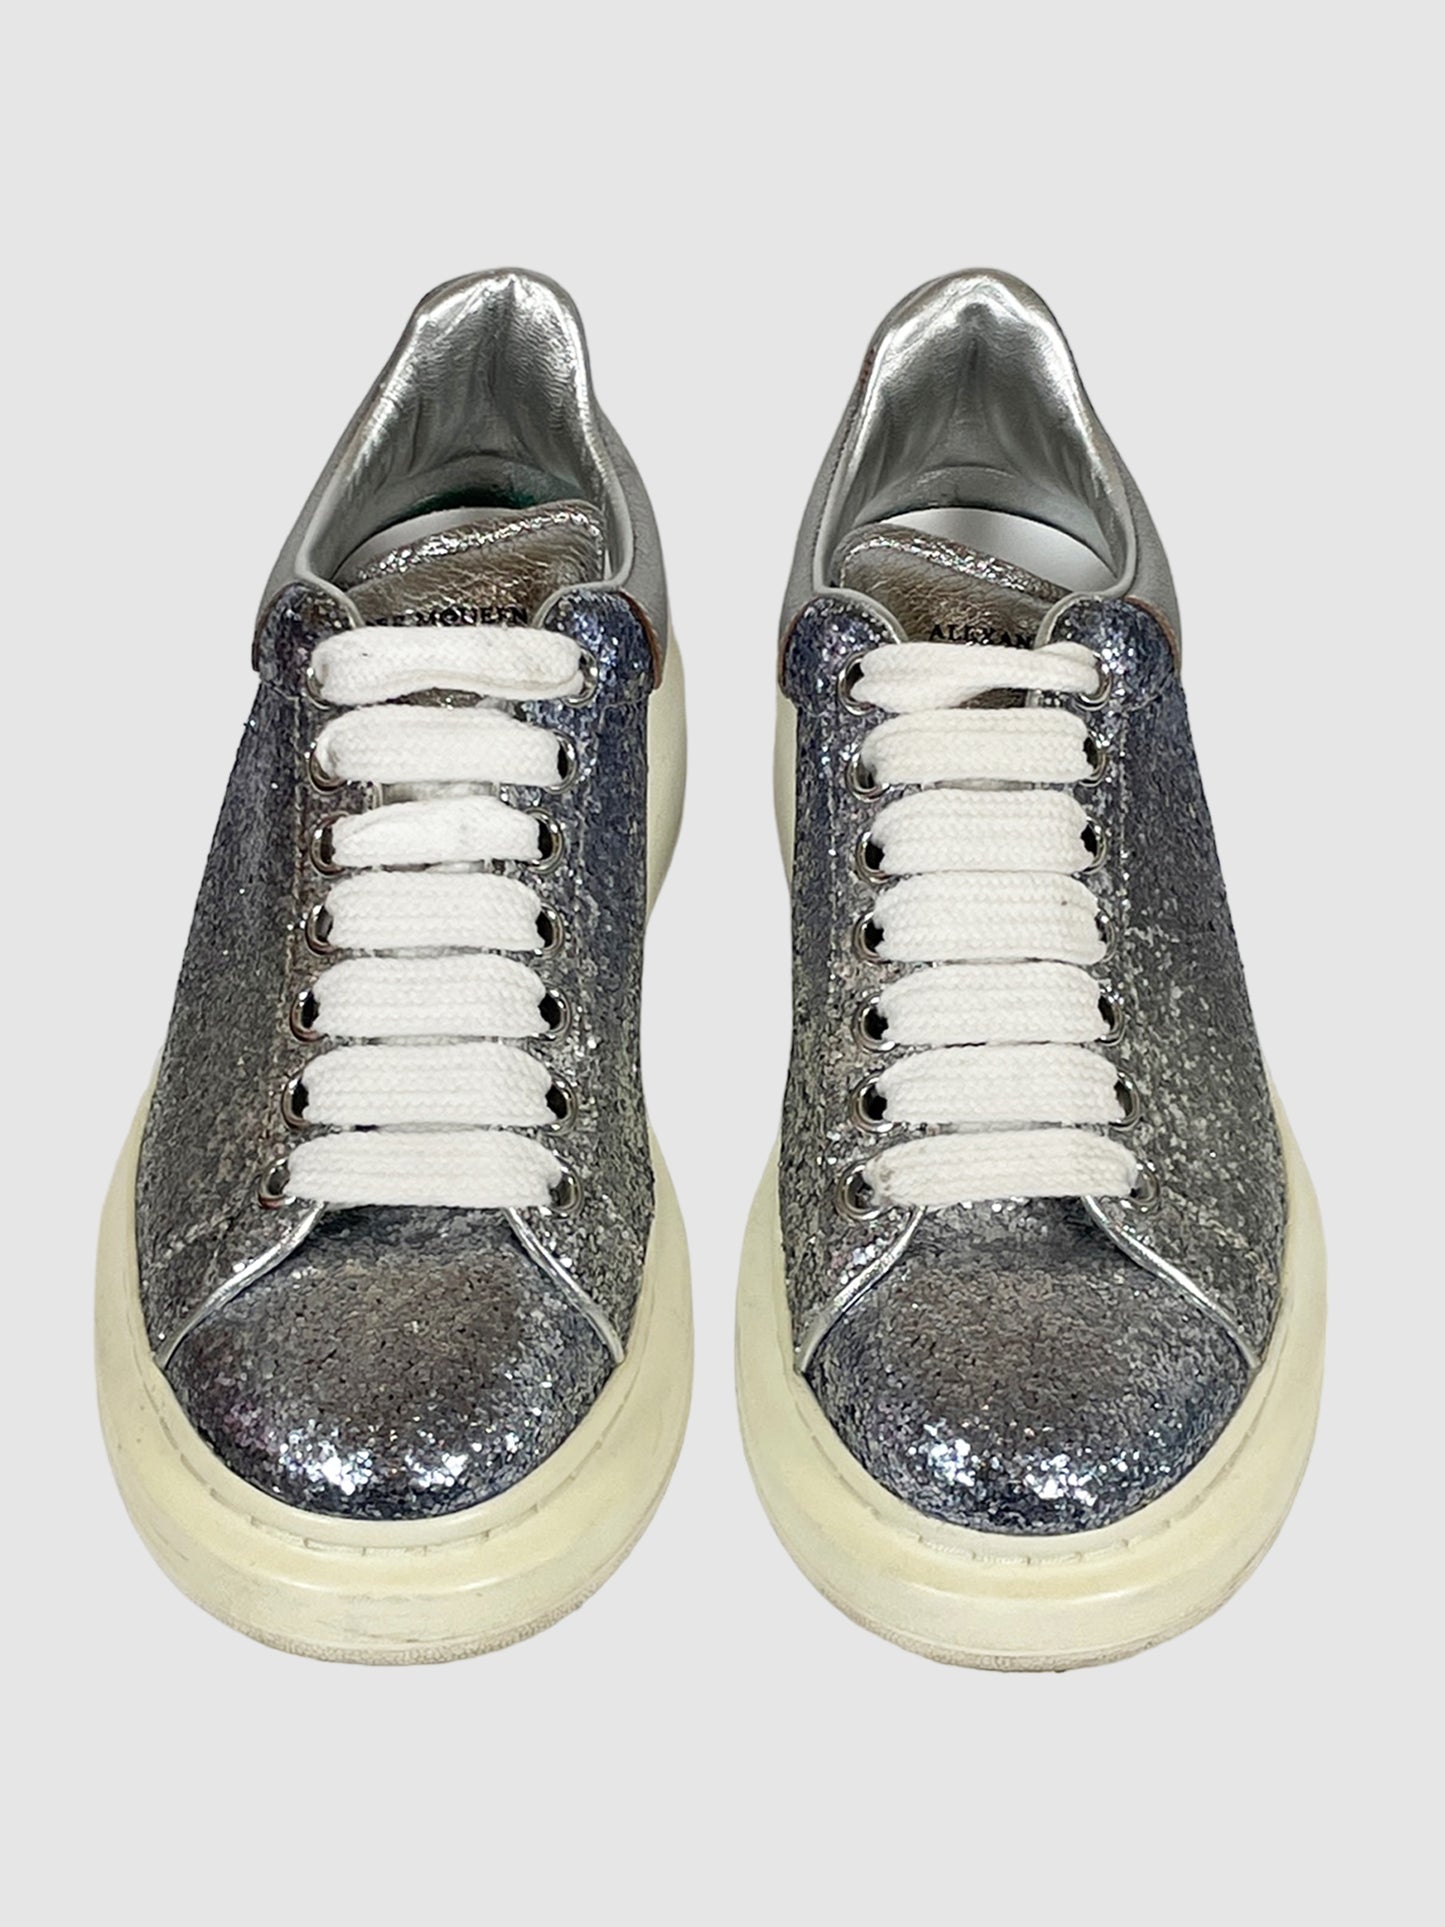 Alexander McQueen Ombre Glittered Leather Low Top Sneakers - Size 37